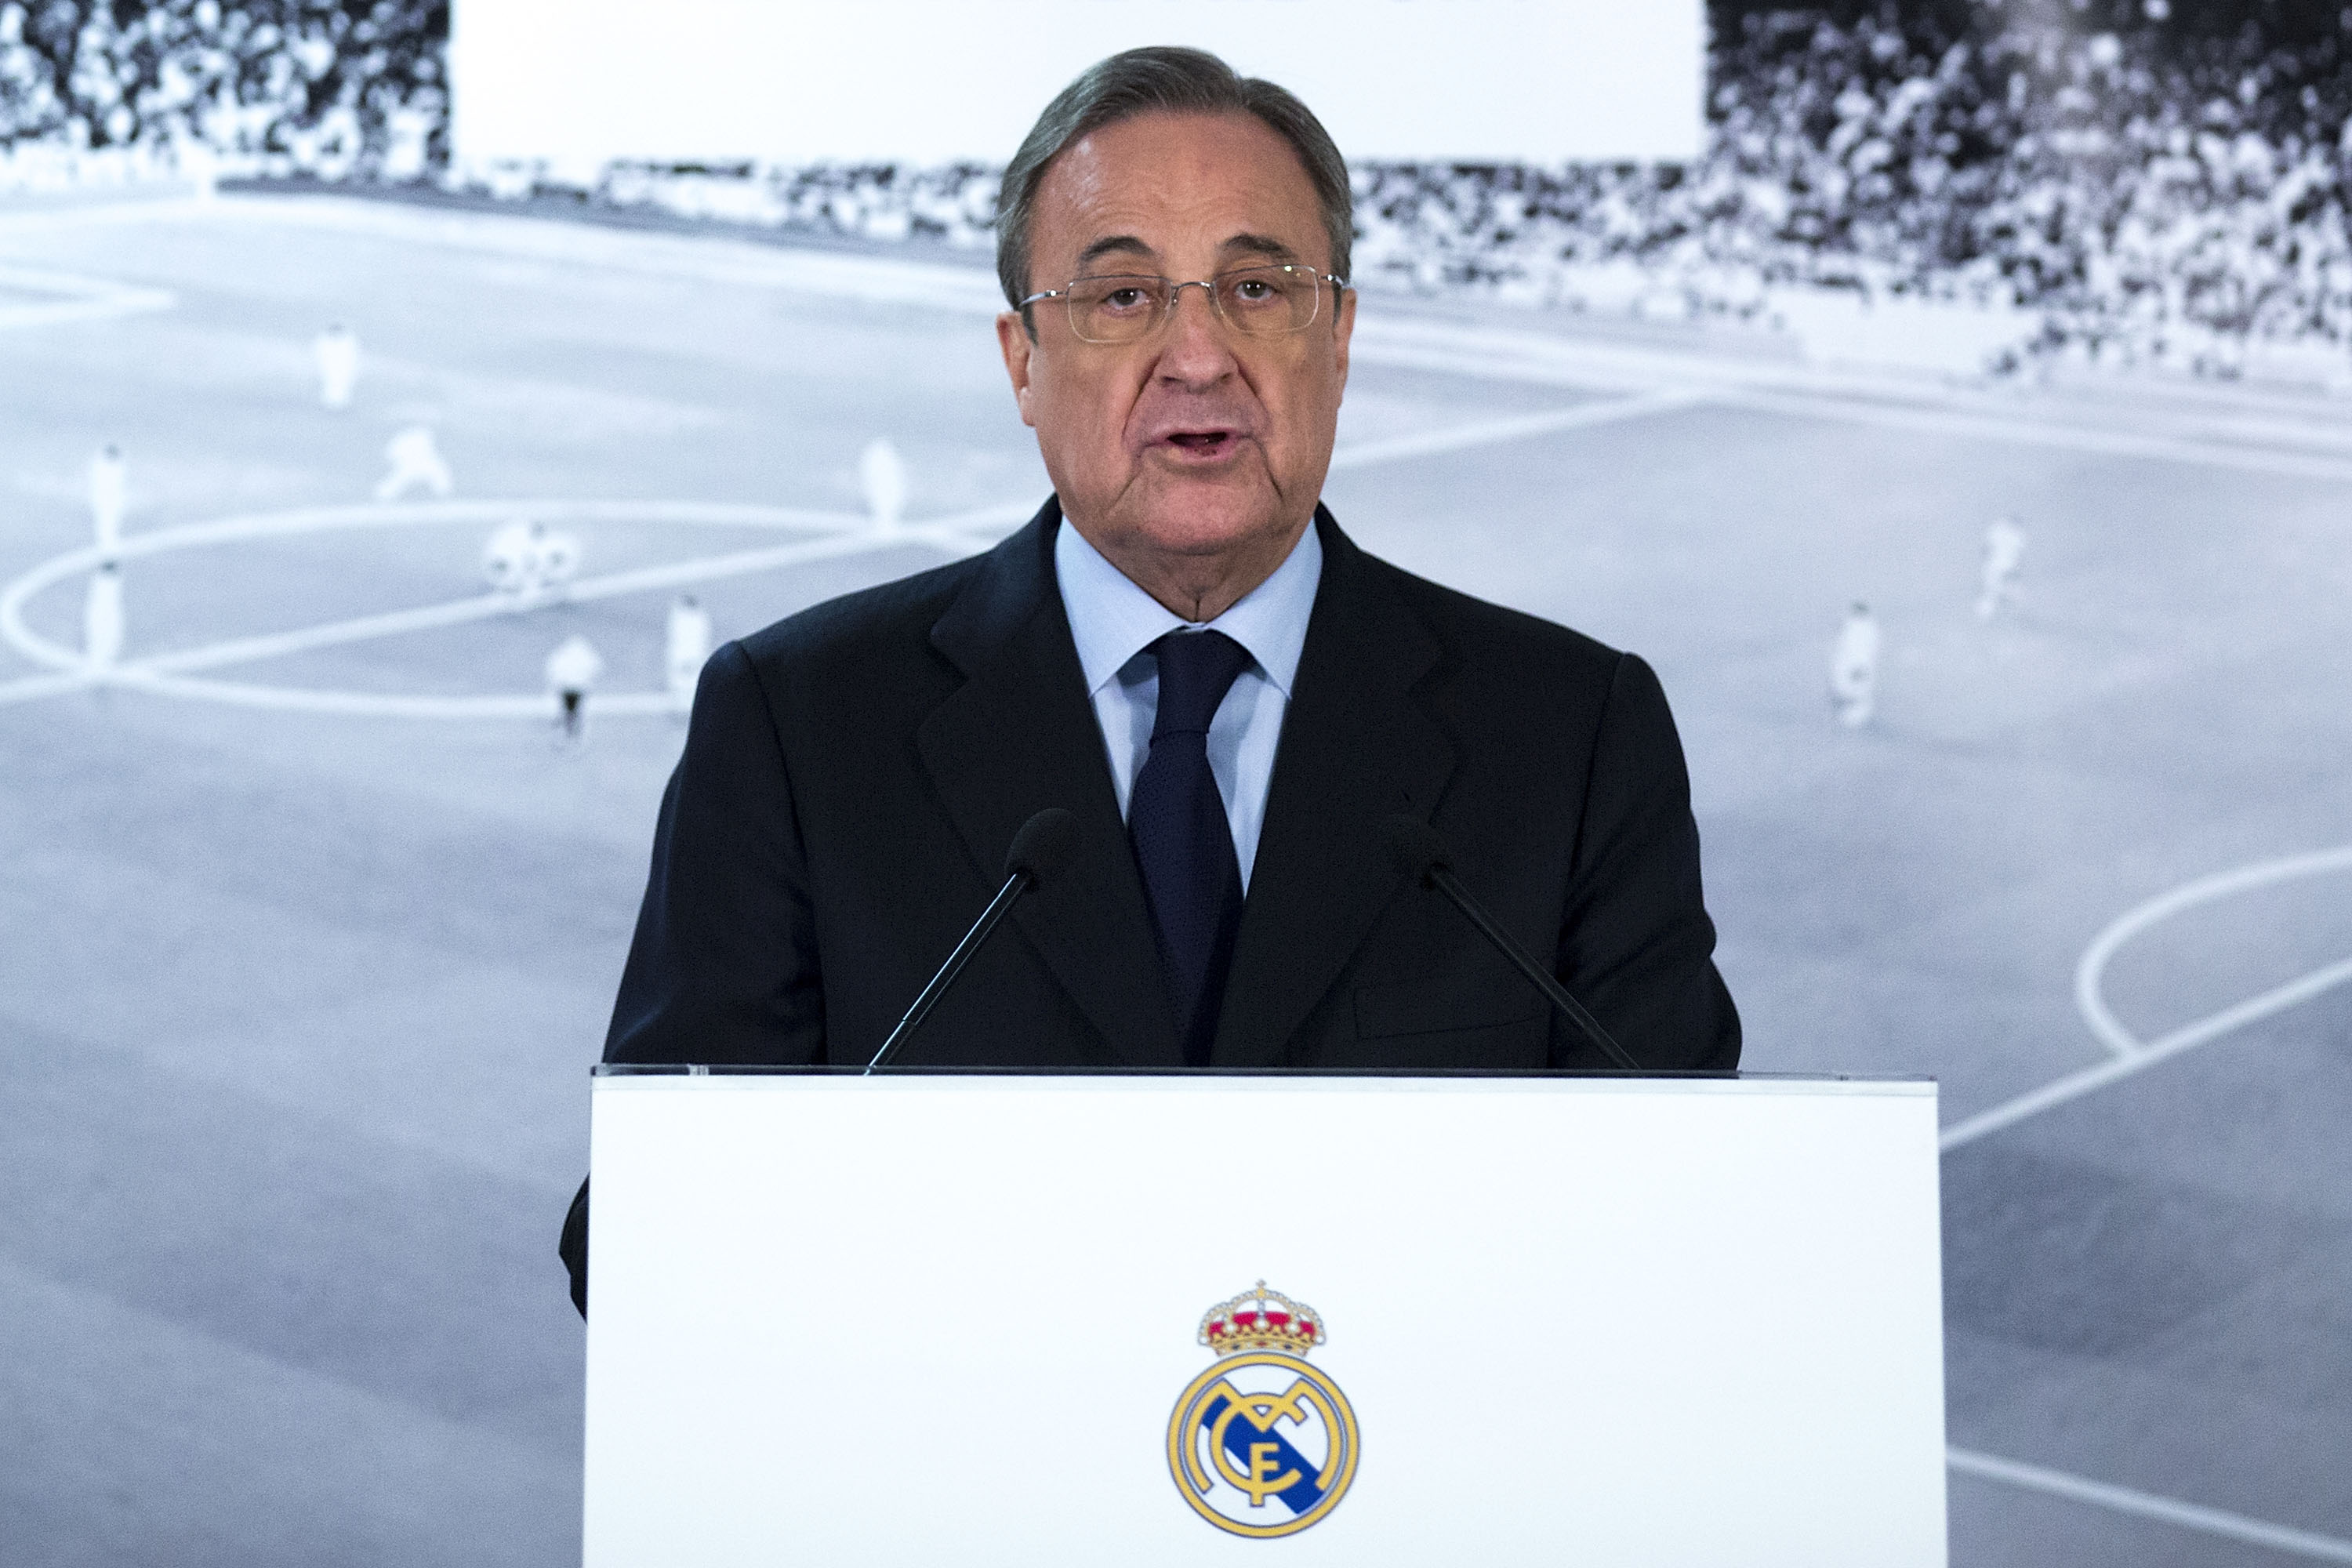 Super League | Impossible to leave a binding contract, asserts Florentino Perez